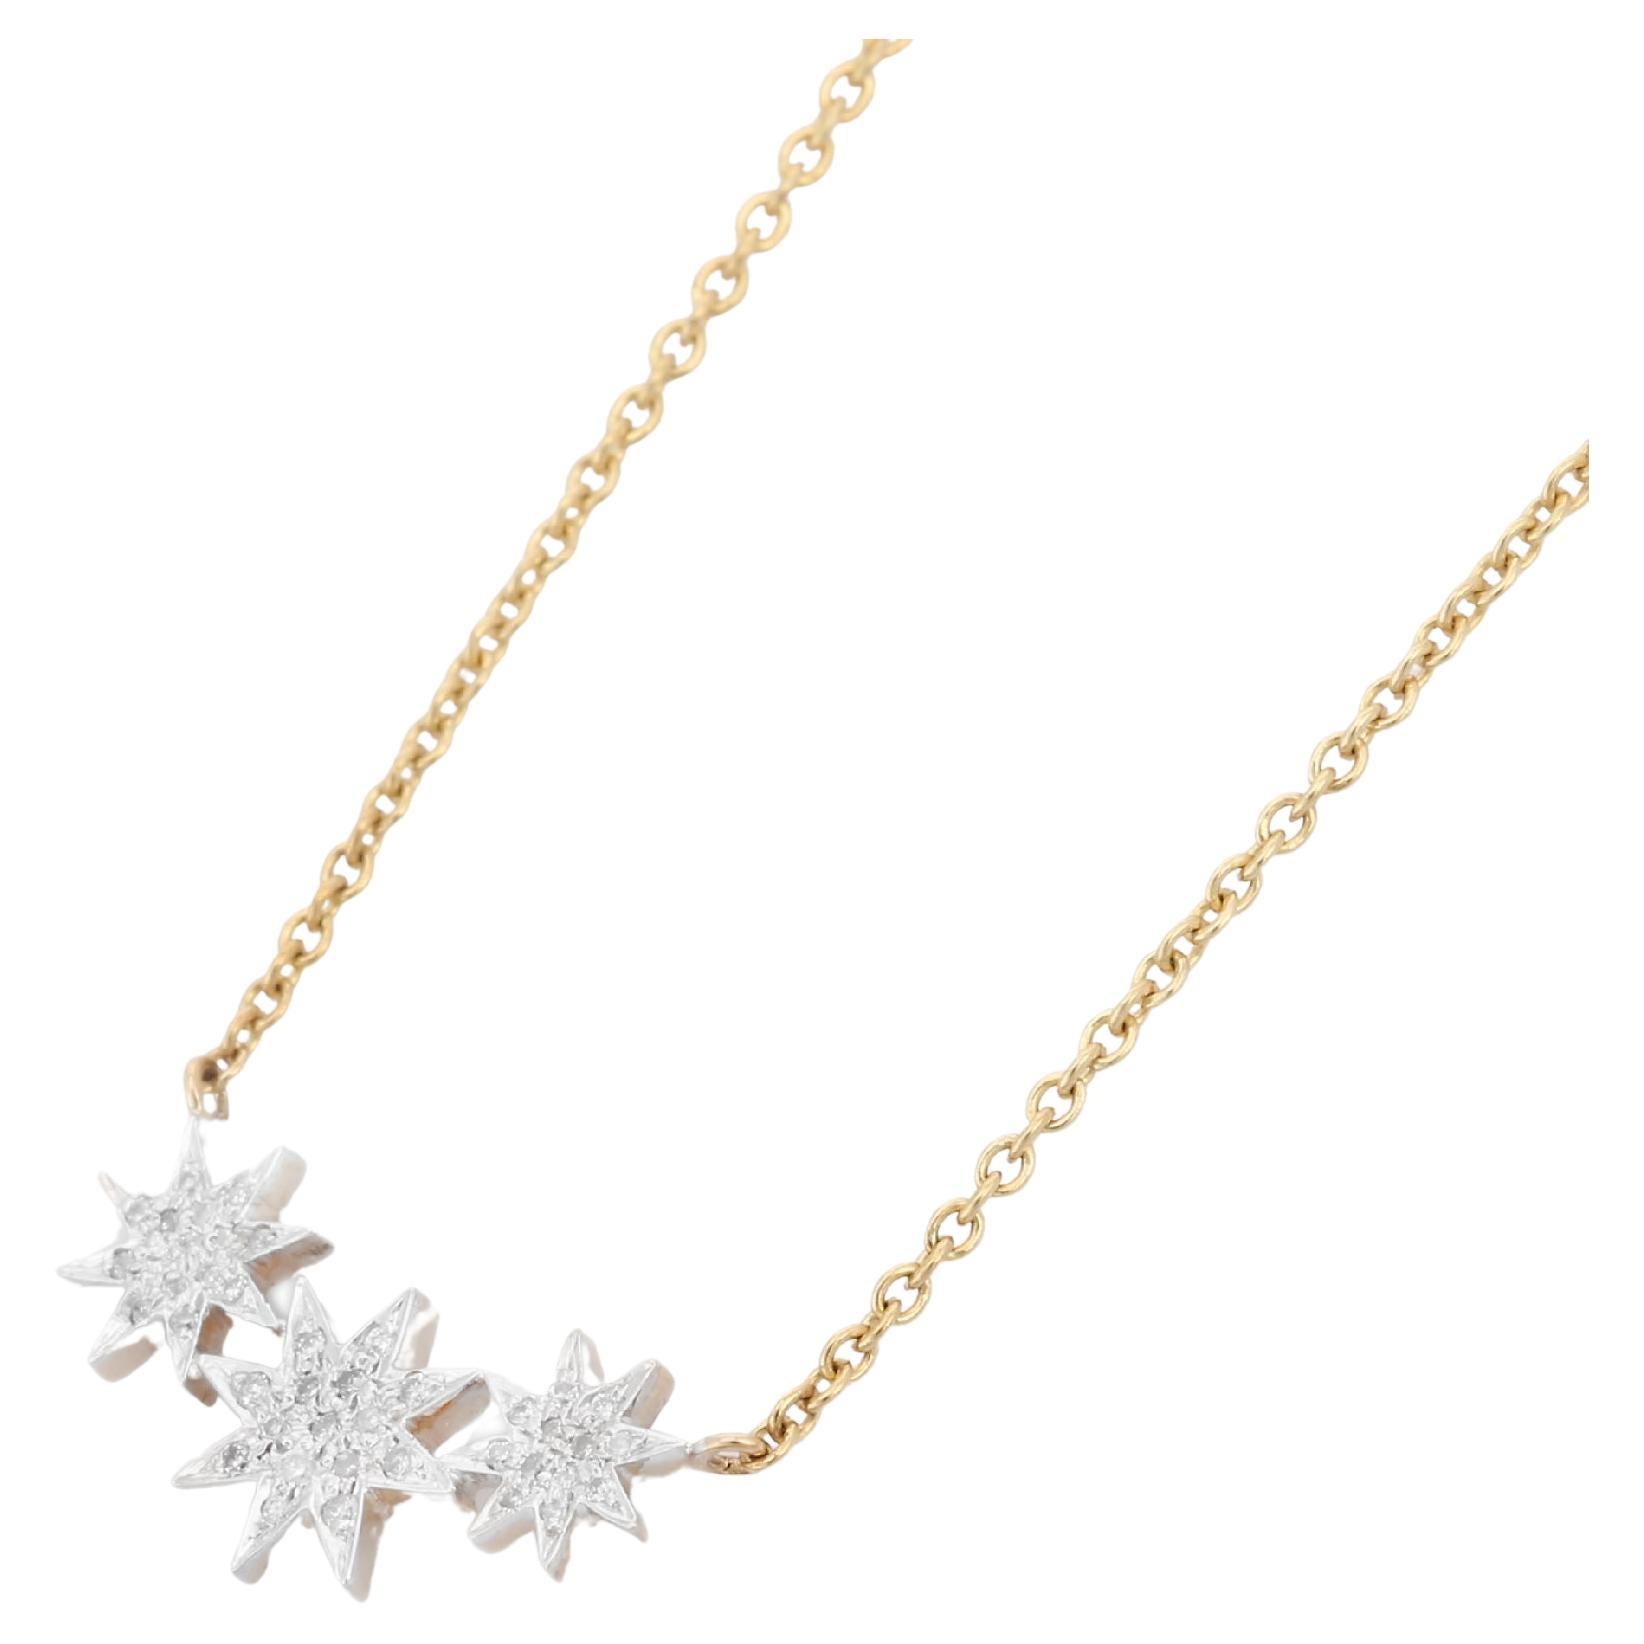 3 star gold necklace